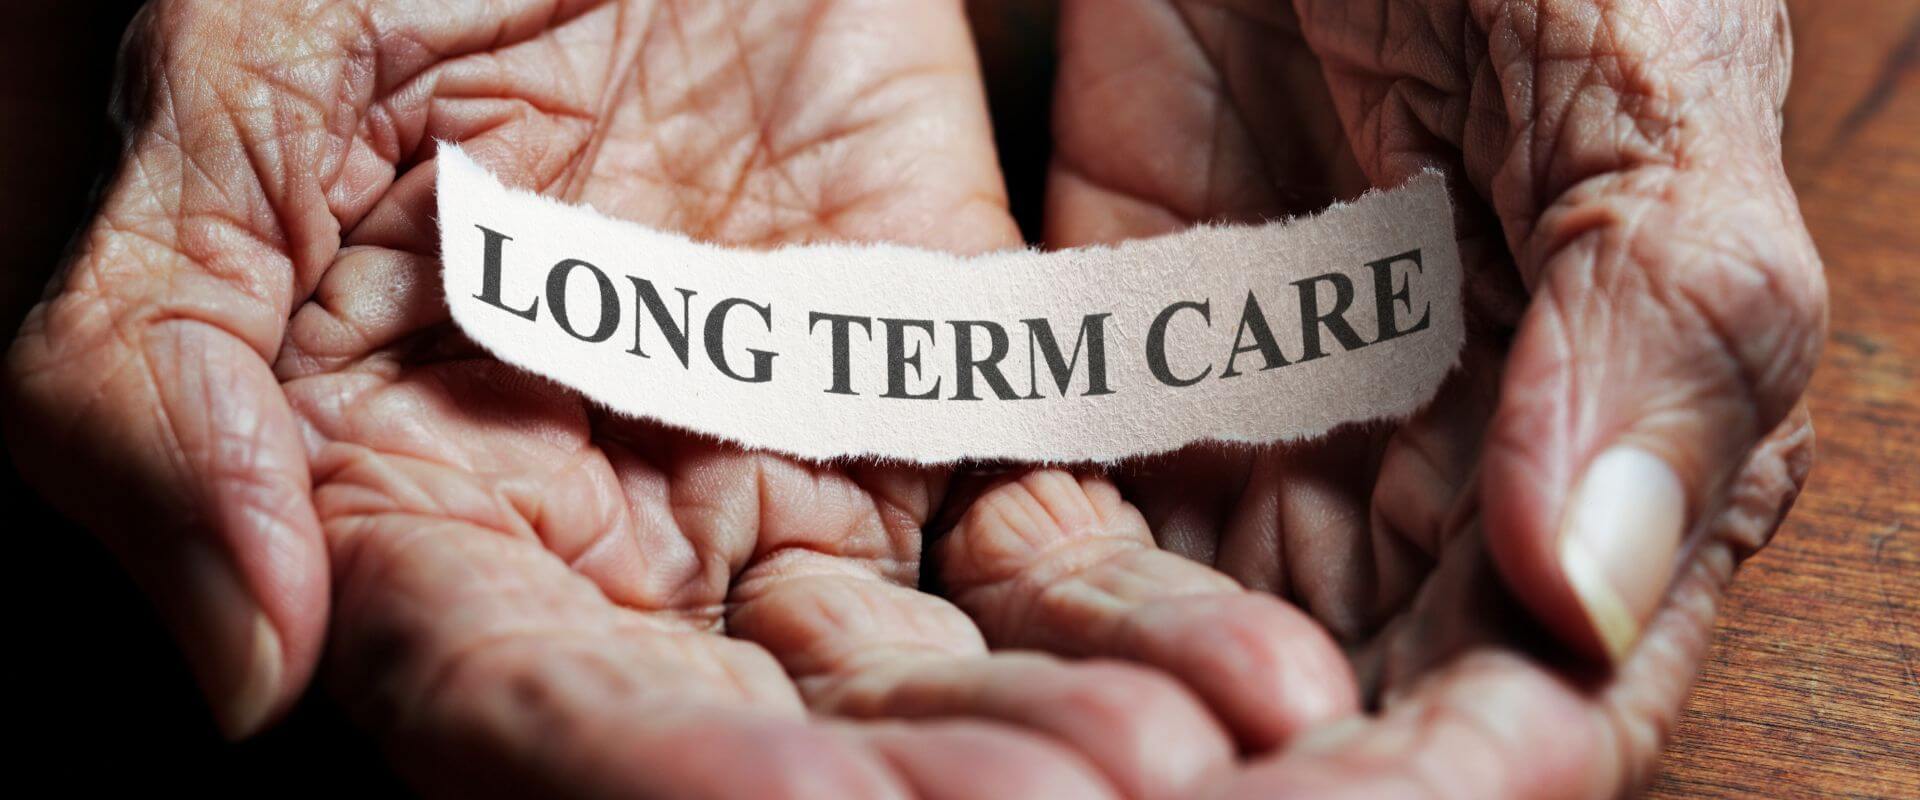 Medicare and Long term care in Kansas City